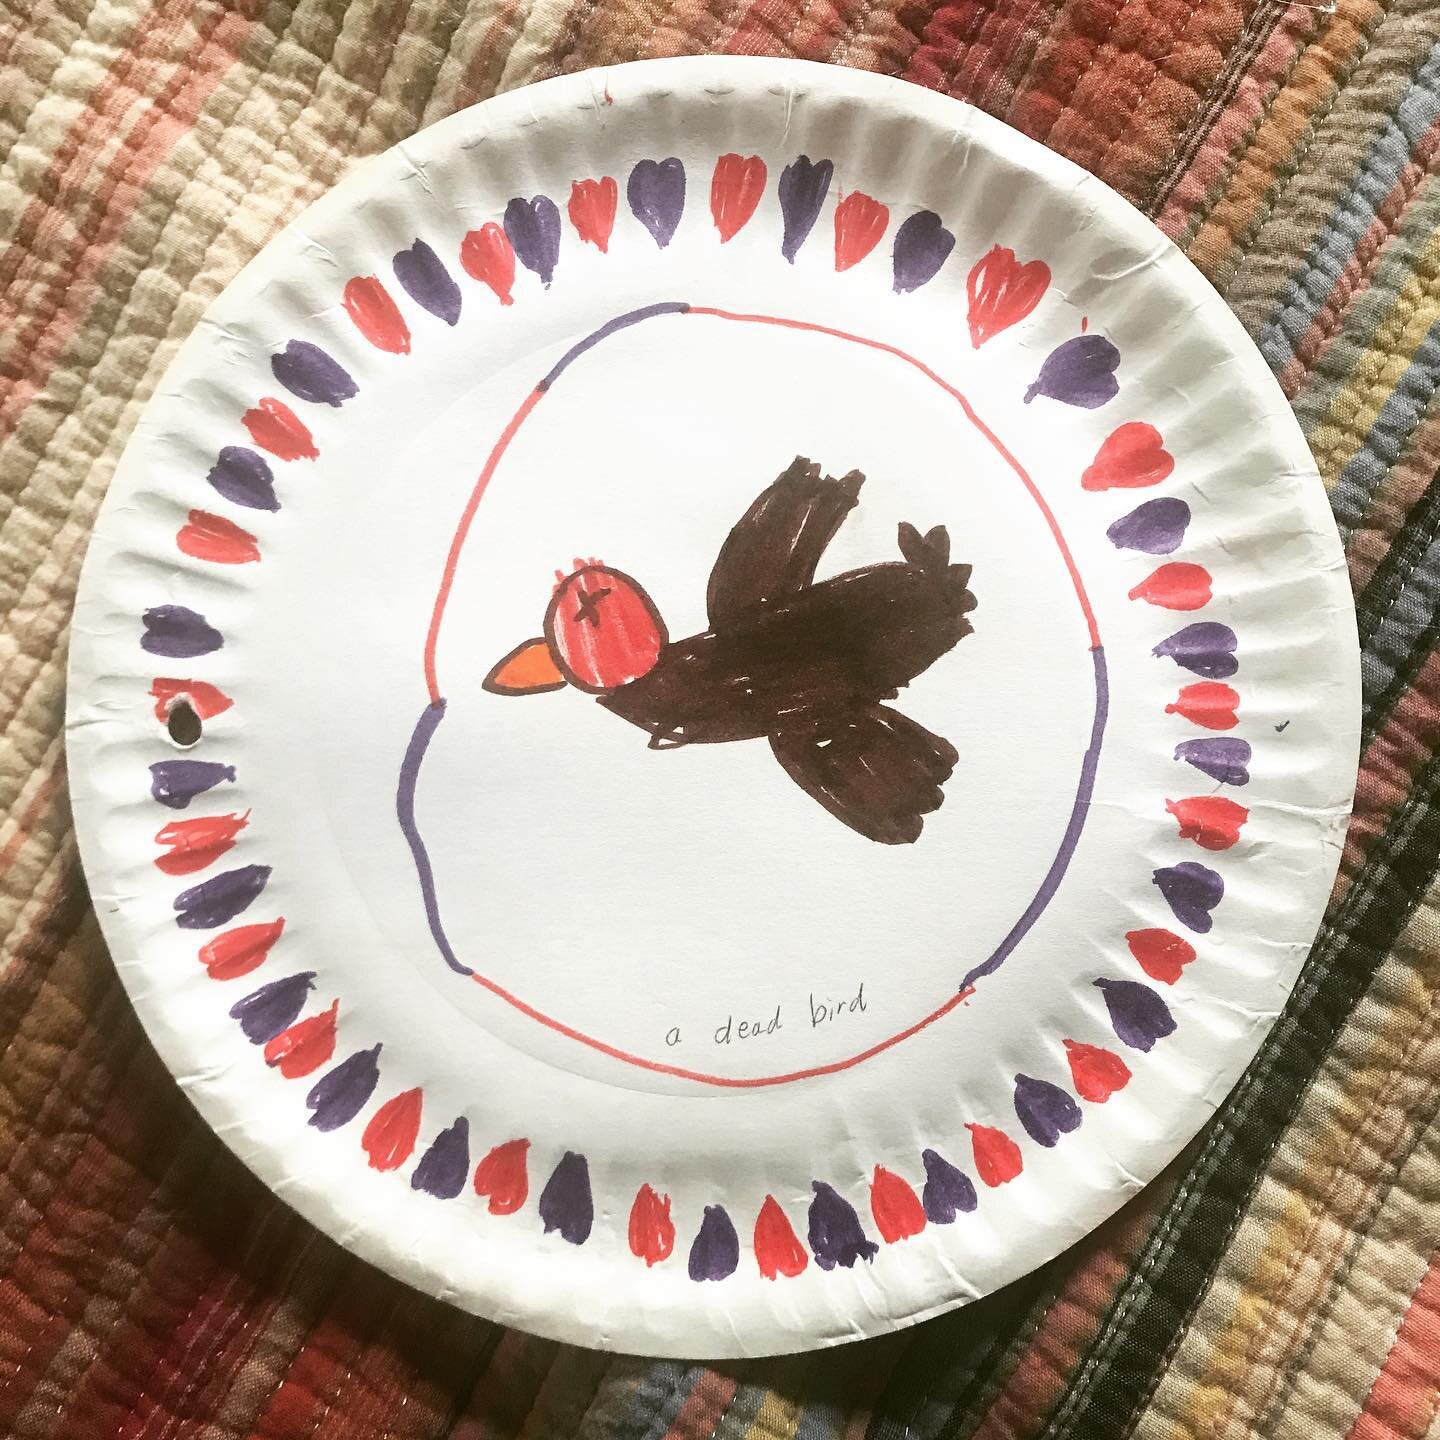 *Guest unearthing*
I love picturing the teacher assigning this art project and getting back dogs and rainbows and trucks and then...this &ldquo;A Dead Bird&rdquo;
@beepbeepashlyn 
#CheckOnYourNotOnlyChild 

#getthiskidintherapy #notanonlychild #first